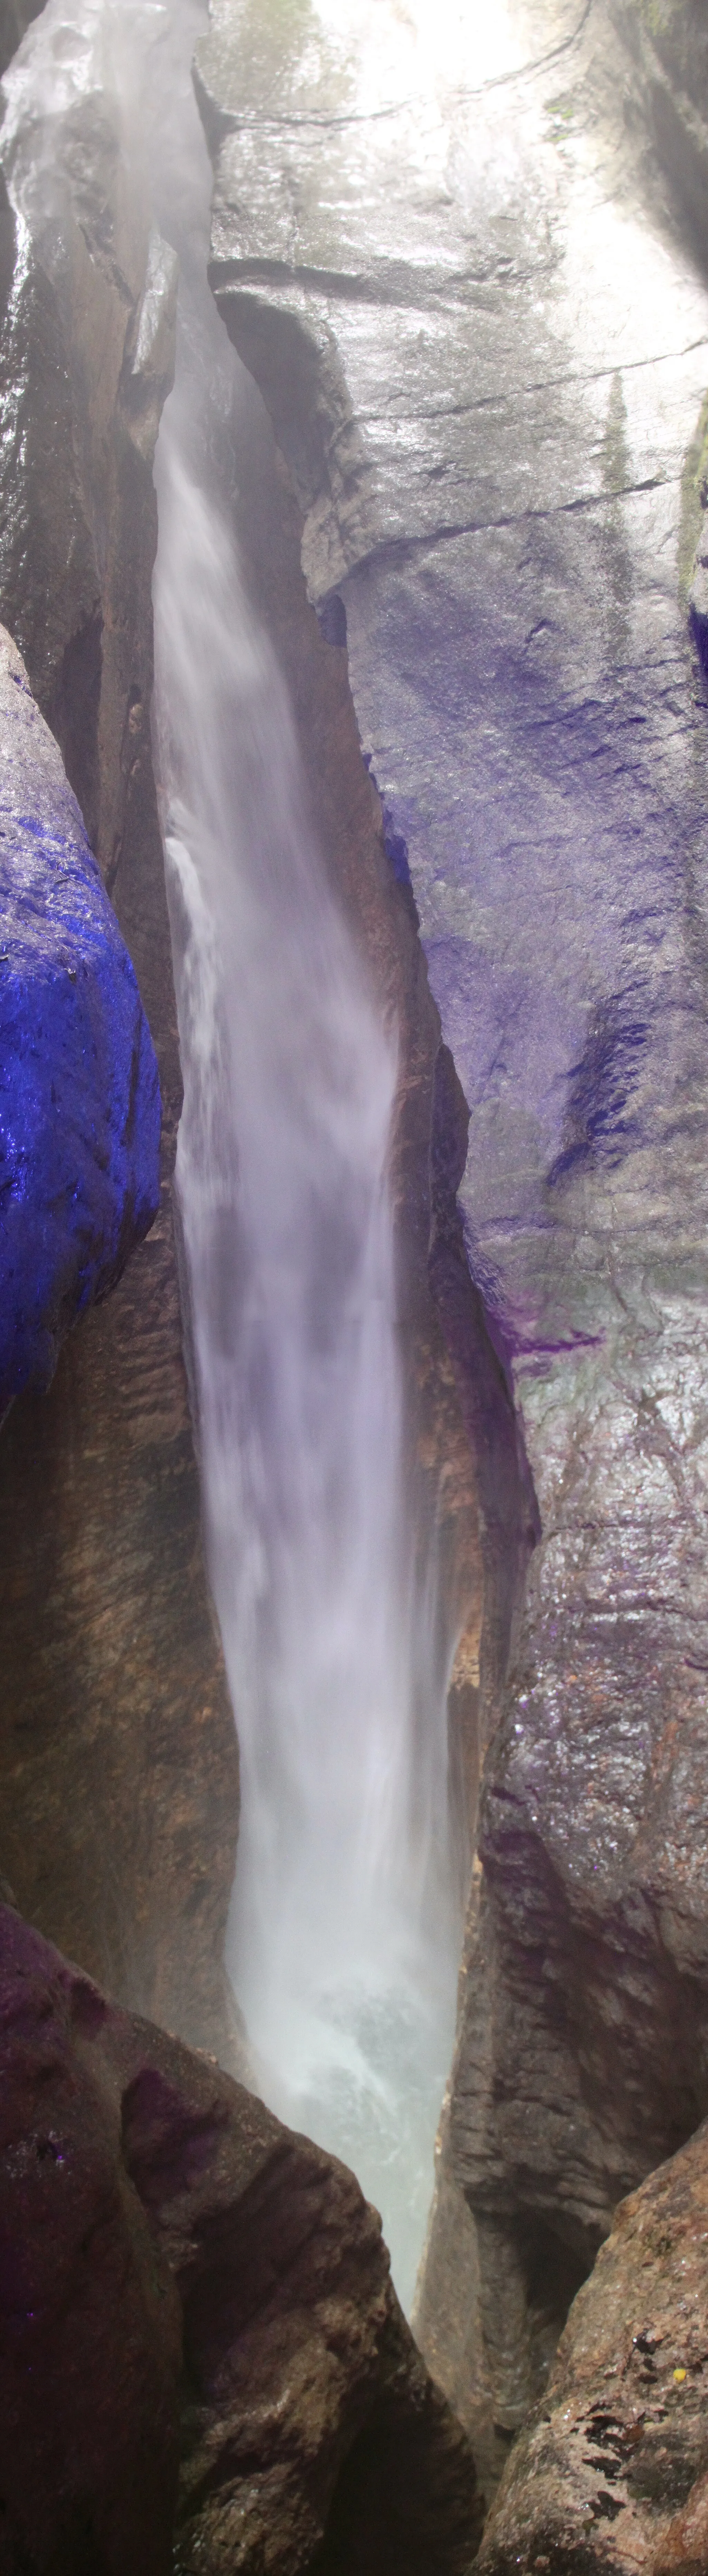 Photo showing: Cascata del Varone, Trento Province, Trentino Region, Italy. Waterfall (Total height about 100 meters, not completely visible). The blue and violet colours are caused by artificial lightning.